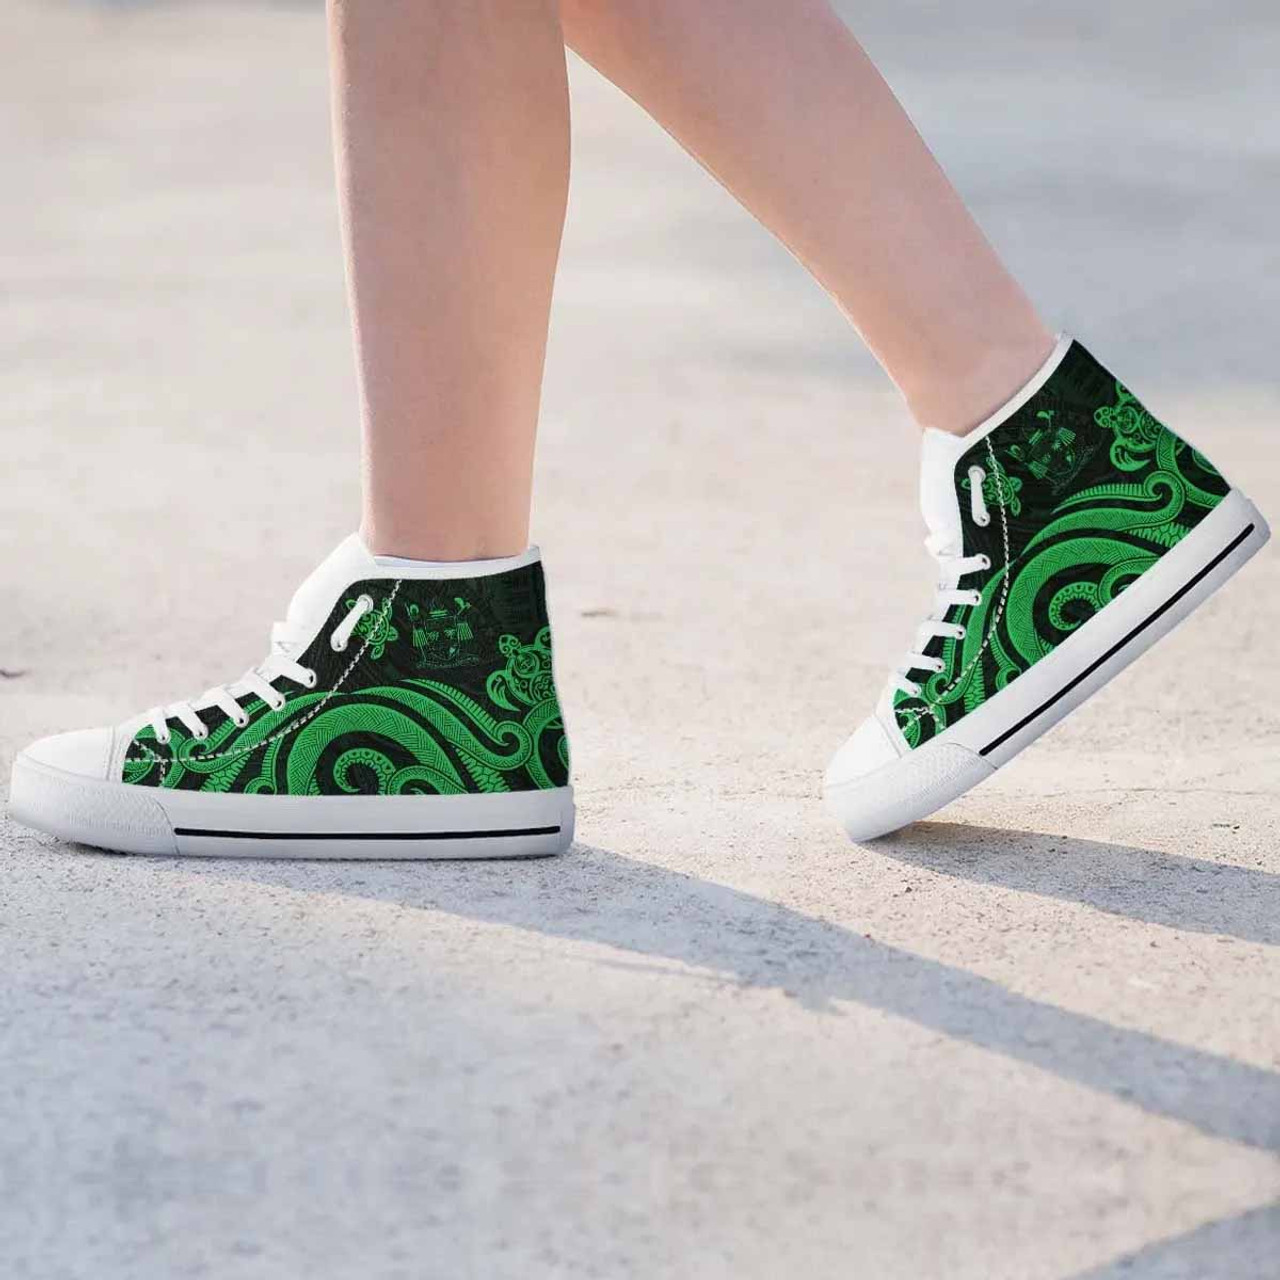 Fiji High Top Shoes - Green Tentacle Turtle Crest 6